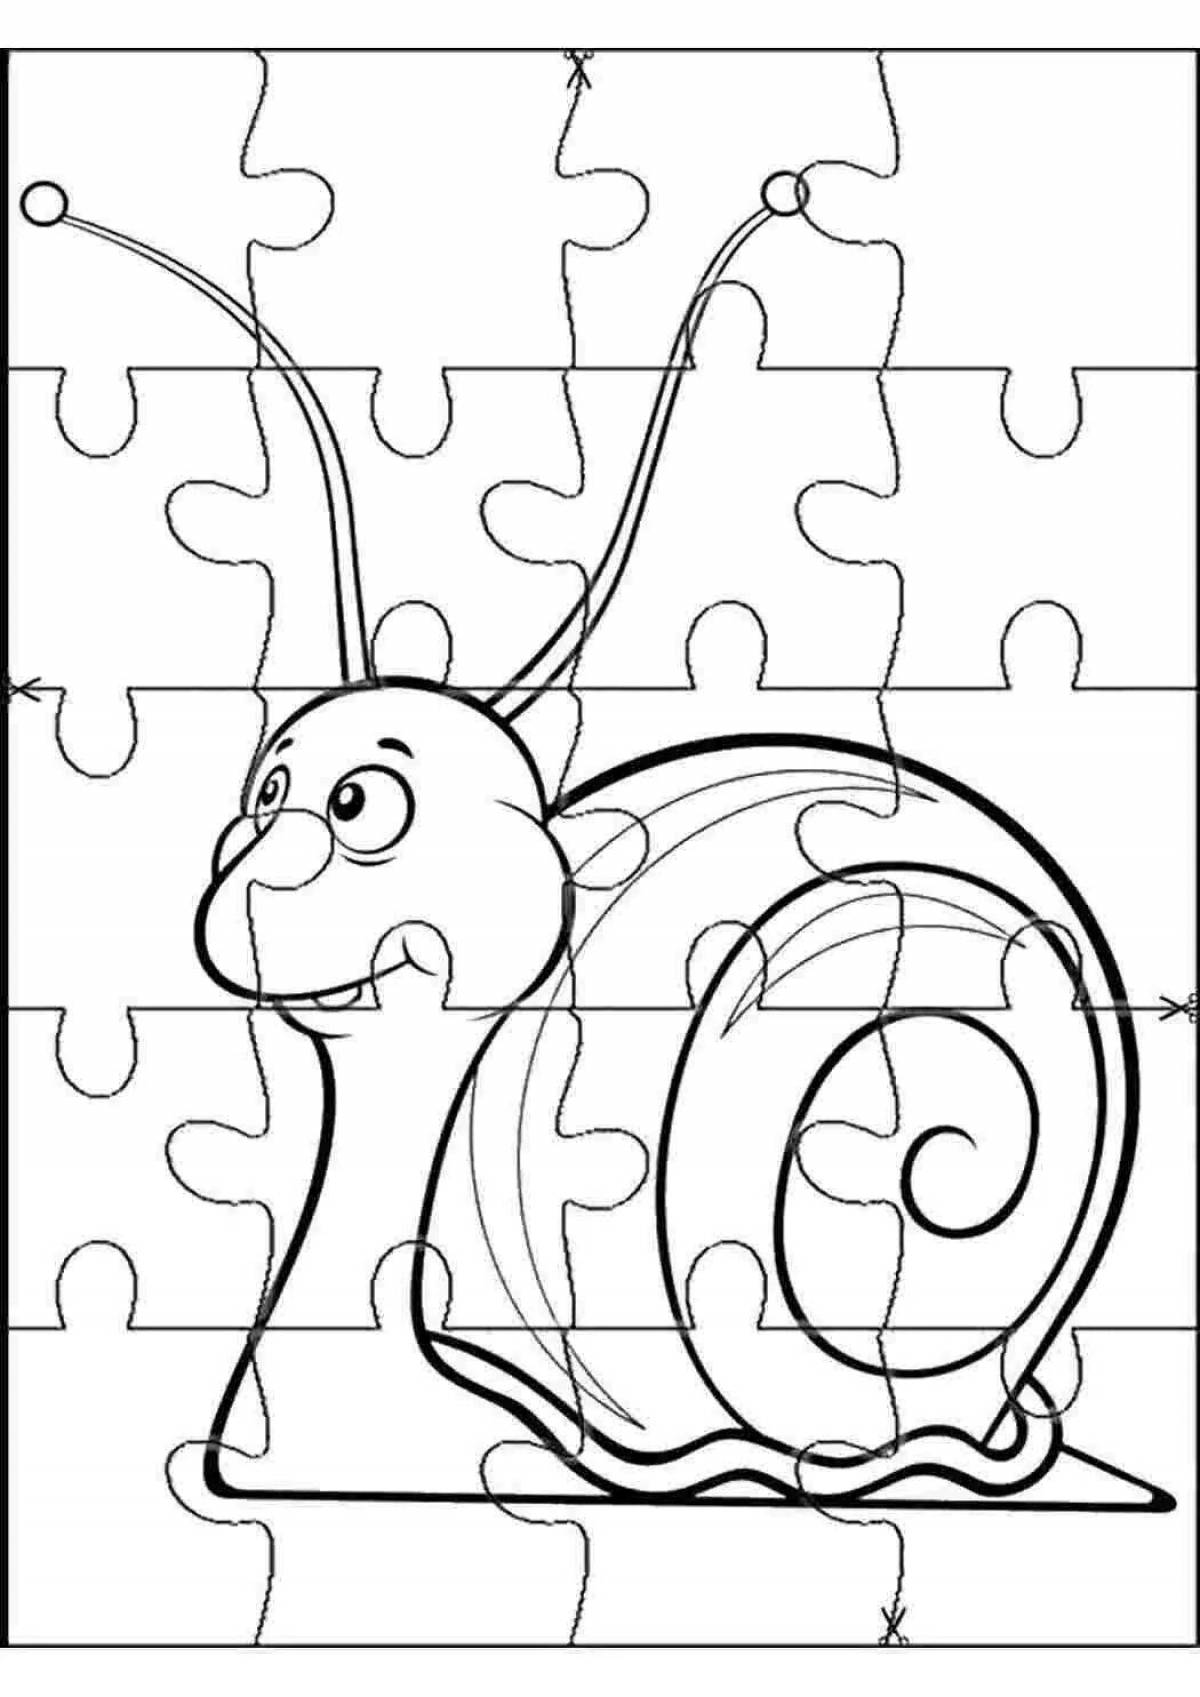 Fun coloring in games for kids 5 years old puzzles